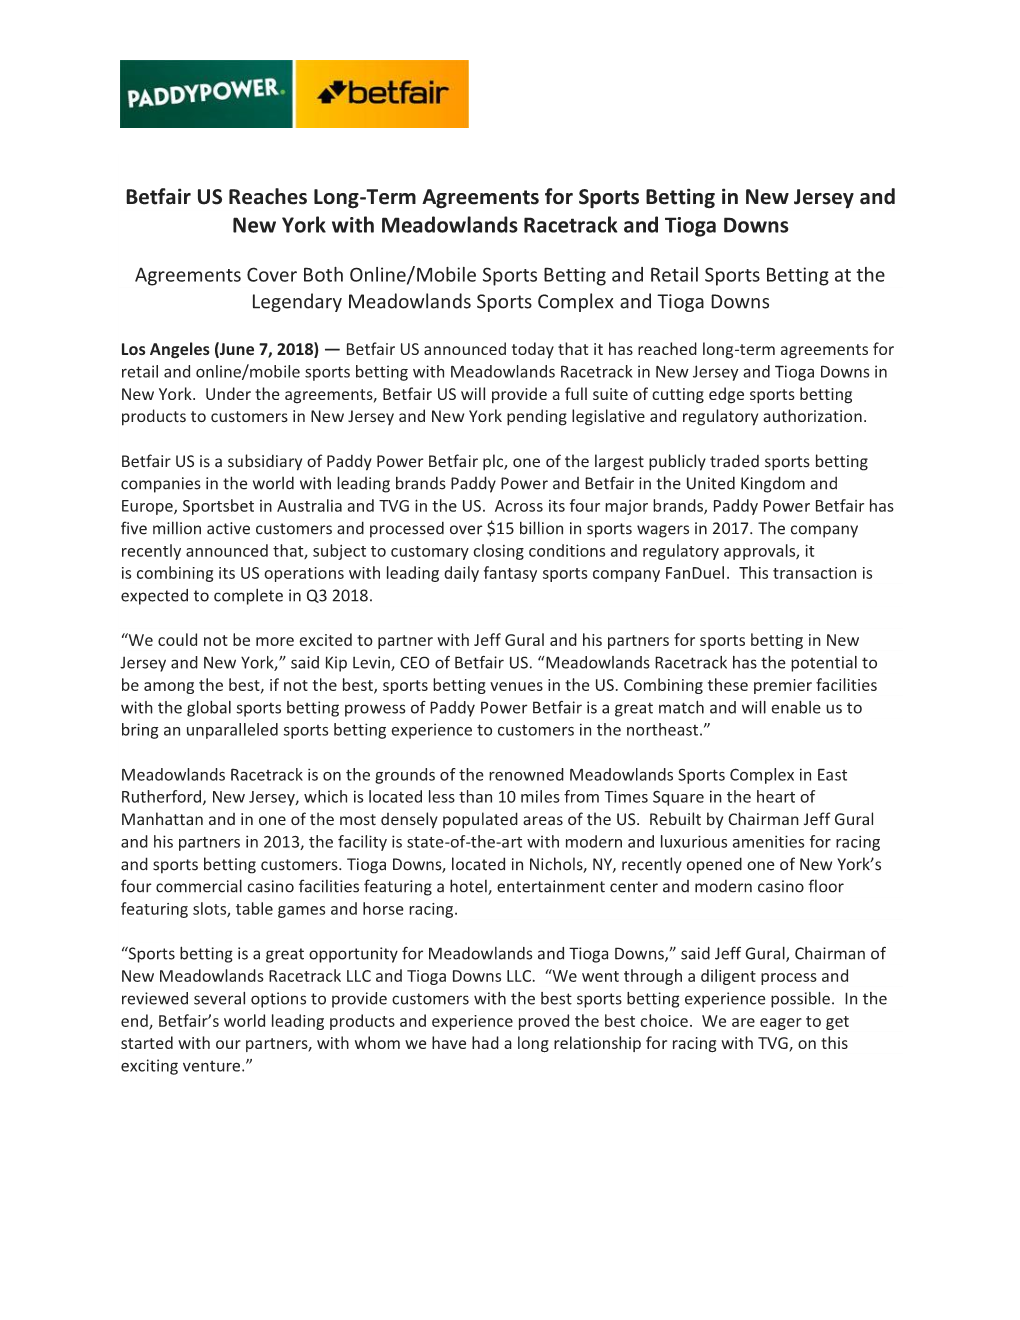 Betfair US Reaches Long-Term Agreements for Sports Betting in New Jersey and New York with Meadowlands Racetrack and Tioga Downs